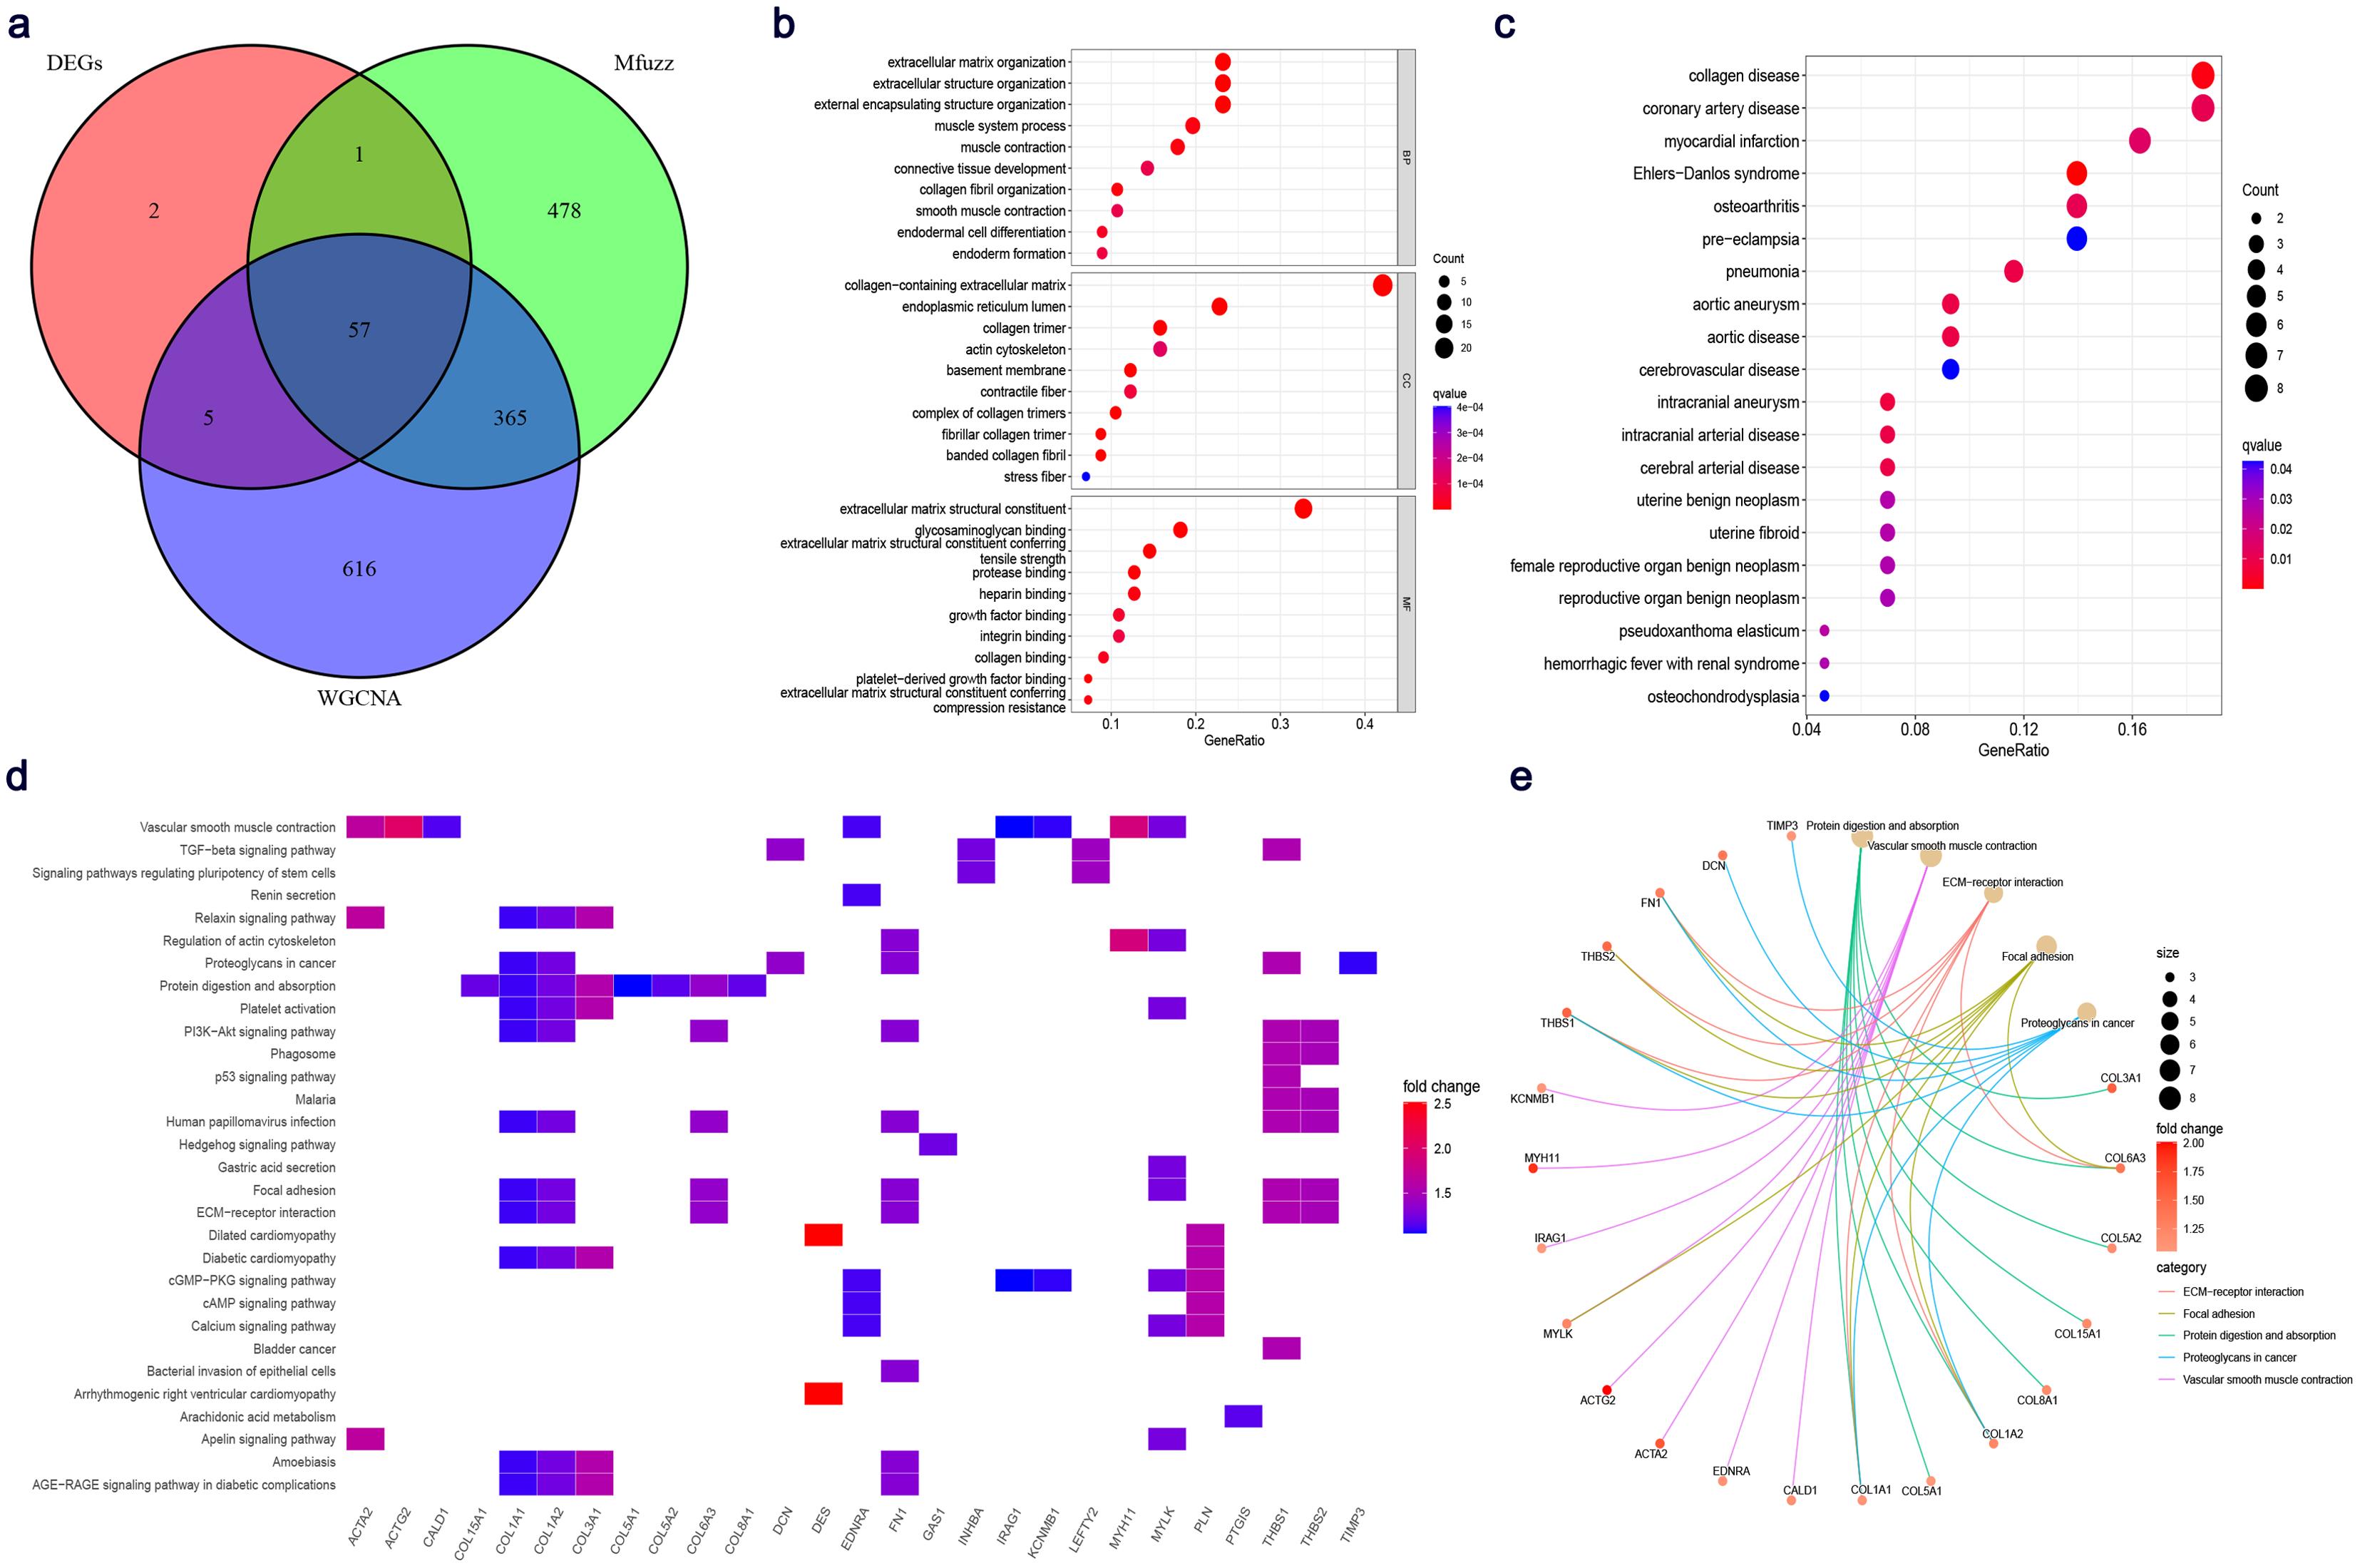 Potential biological functions, associated diseases, and signaling pathways of 57 hub genes.